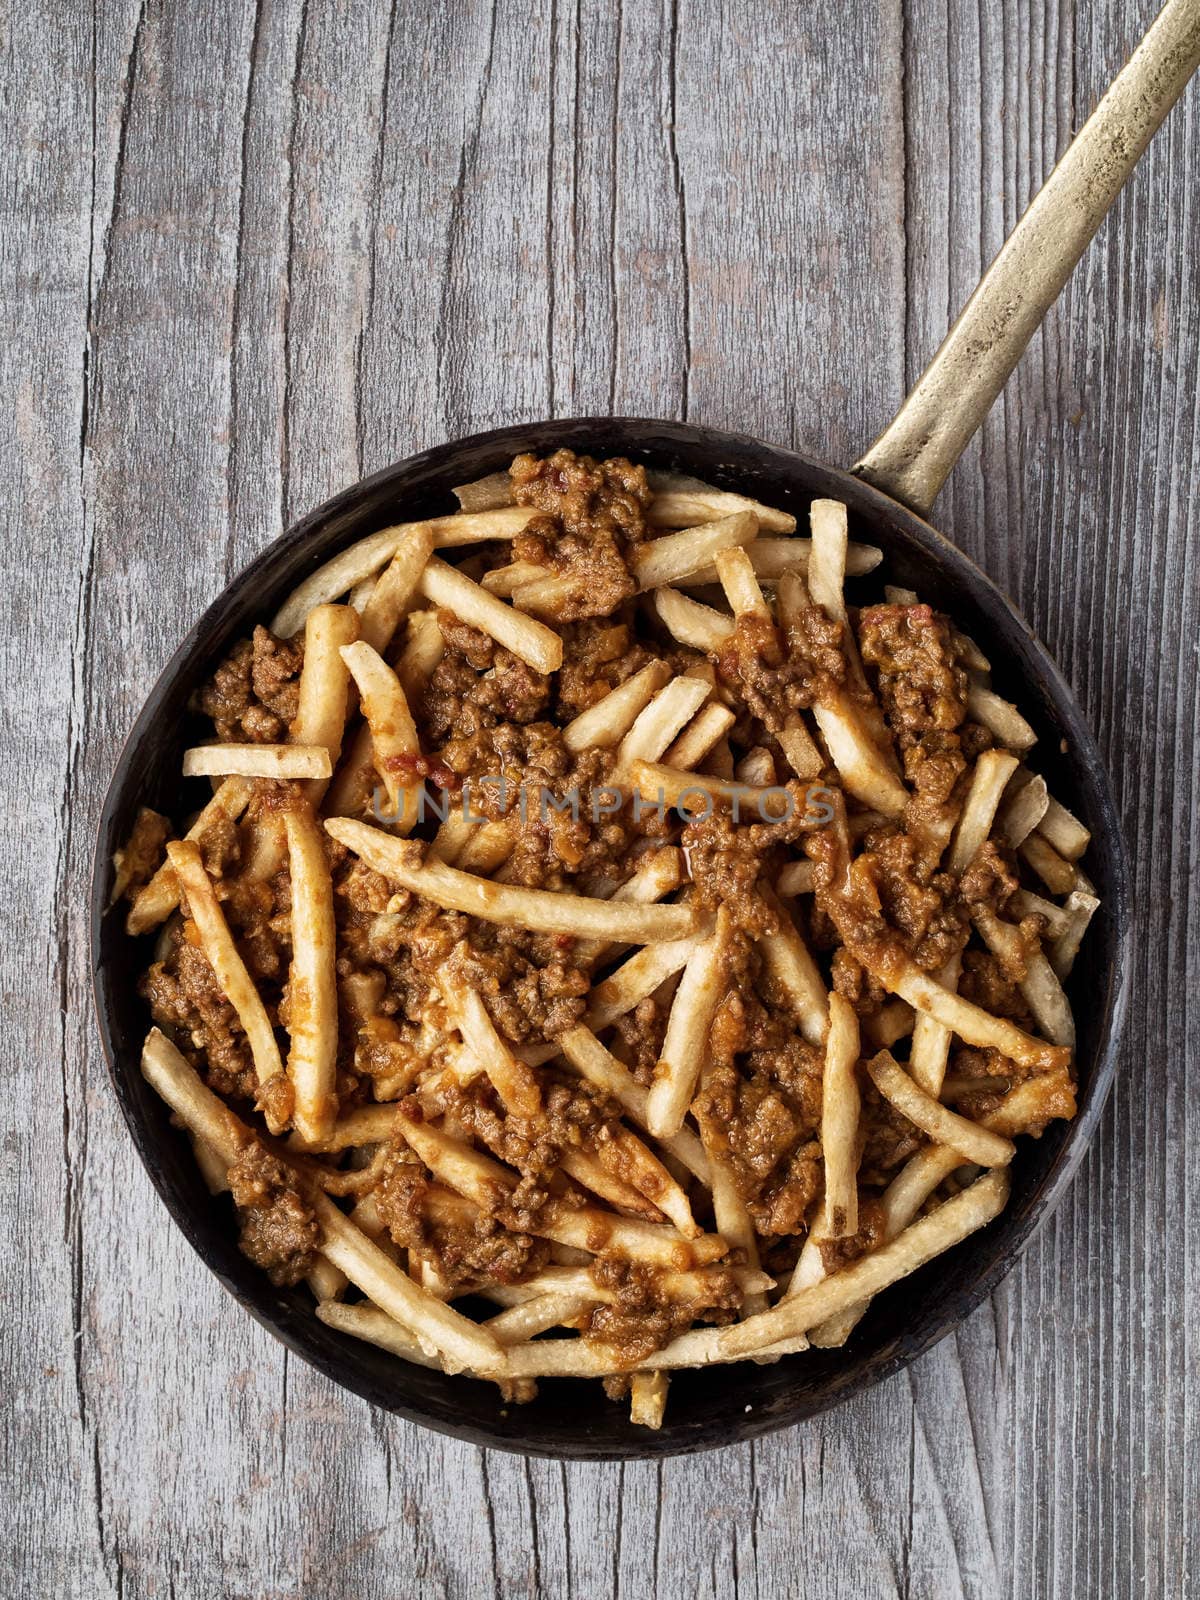 rustic american chili fries by zkruger